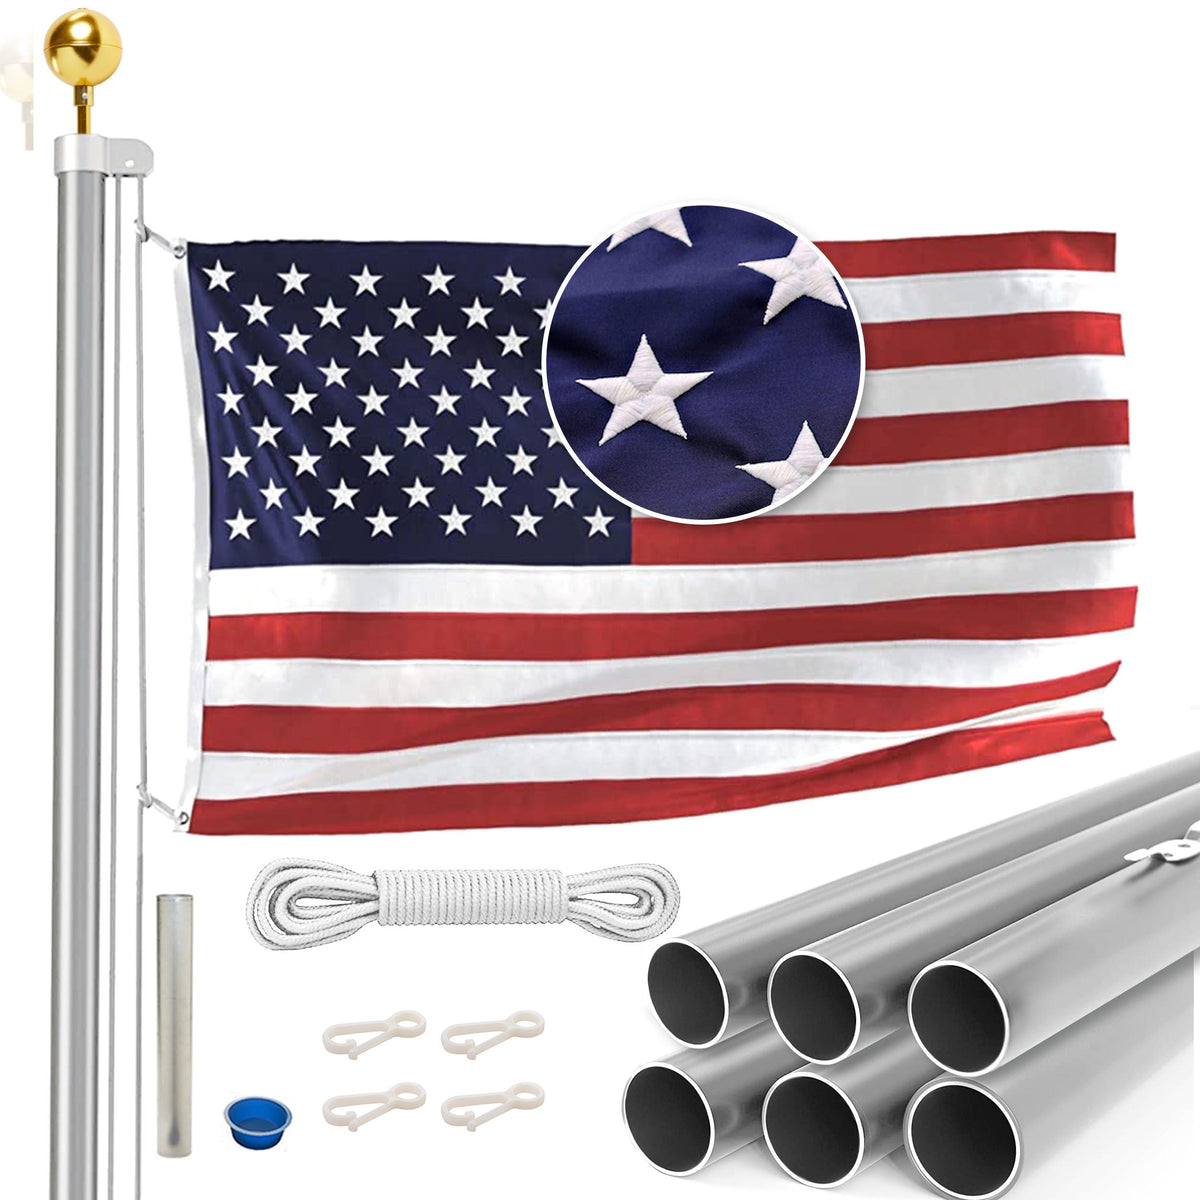 EZPOLE Classic 21 ft. Sectional Flagpole with Rope and 5-ft W x 3